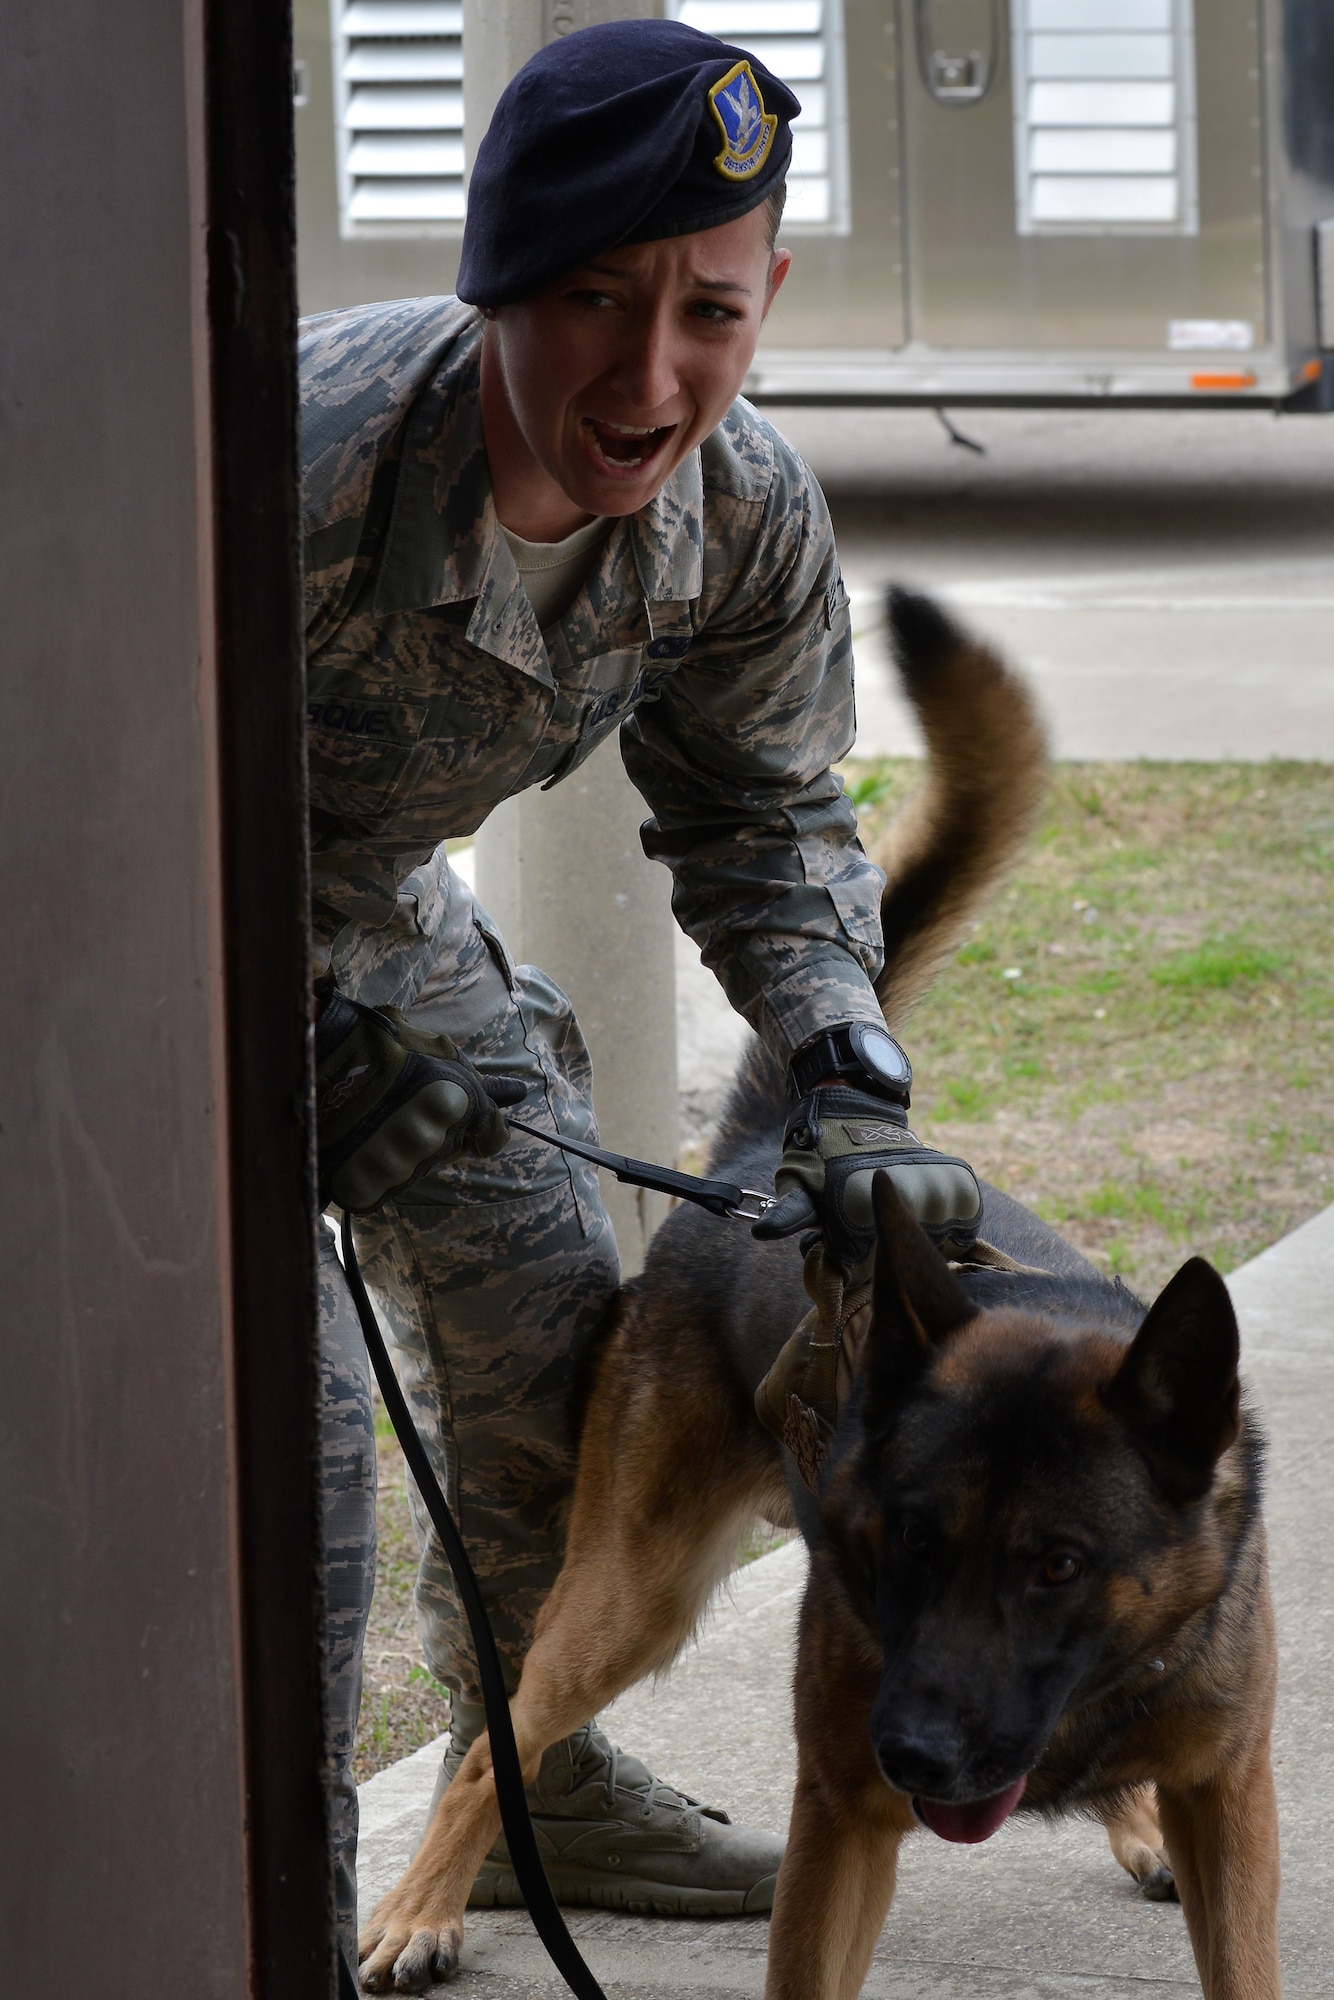 U.S. Air Force Senior Airman Caitlin Bourque, 39th Security Forces Squadron military working dog handler, and Brix, relay a warning prior to entering a building during detection training, Mar. 2, 2017, at Incirlik Air Base, Turkey. The warning offers perpetrators a chance to surrender before law enforcement engages with force. (U.S. Air Force photo by Senior Airman John Nieves Camacho)